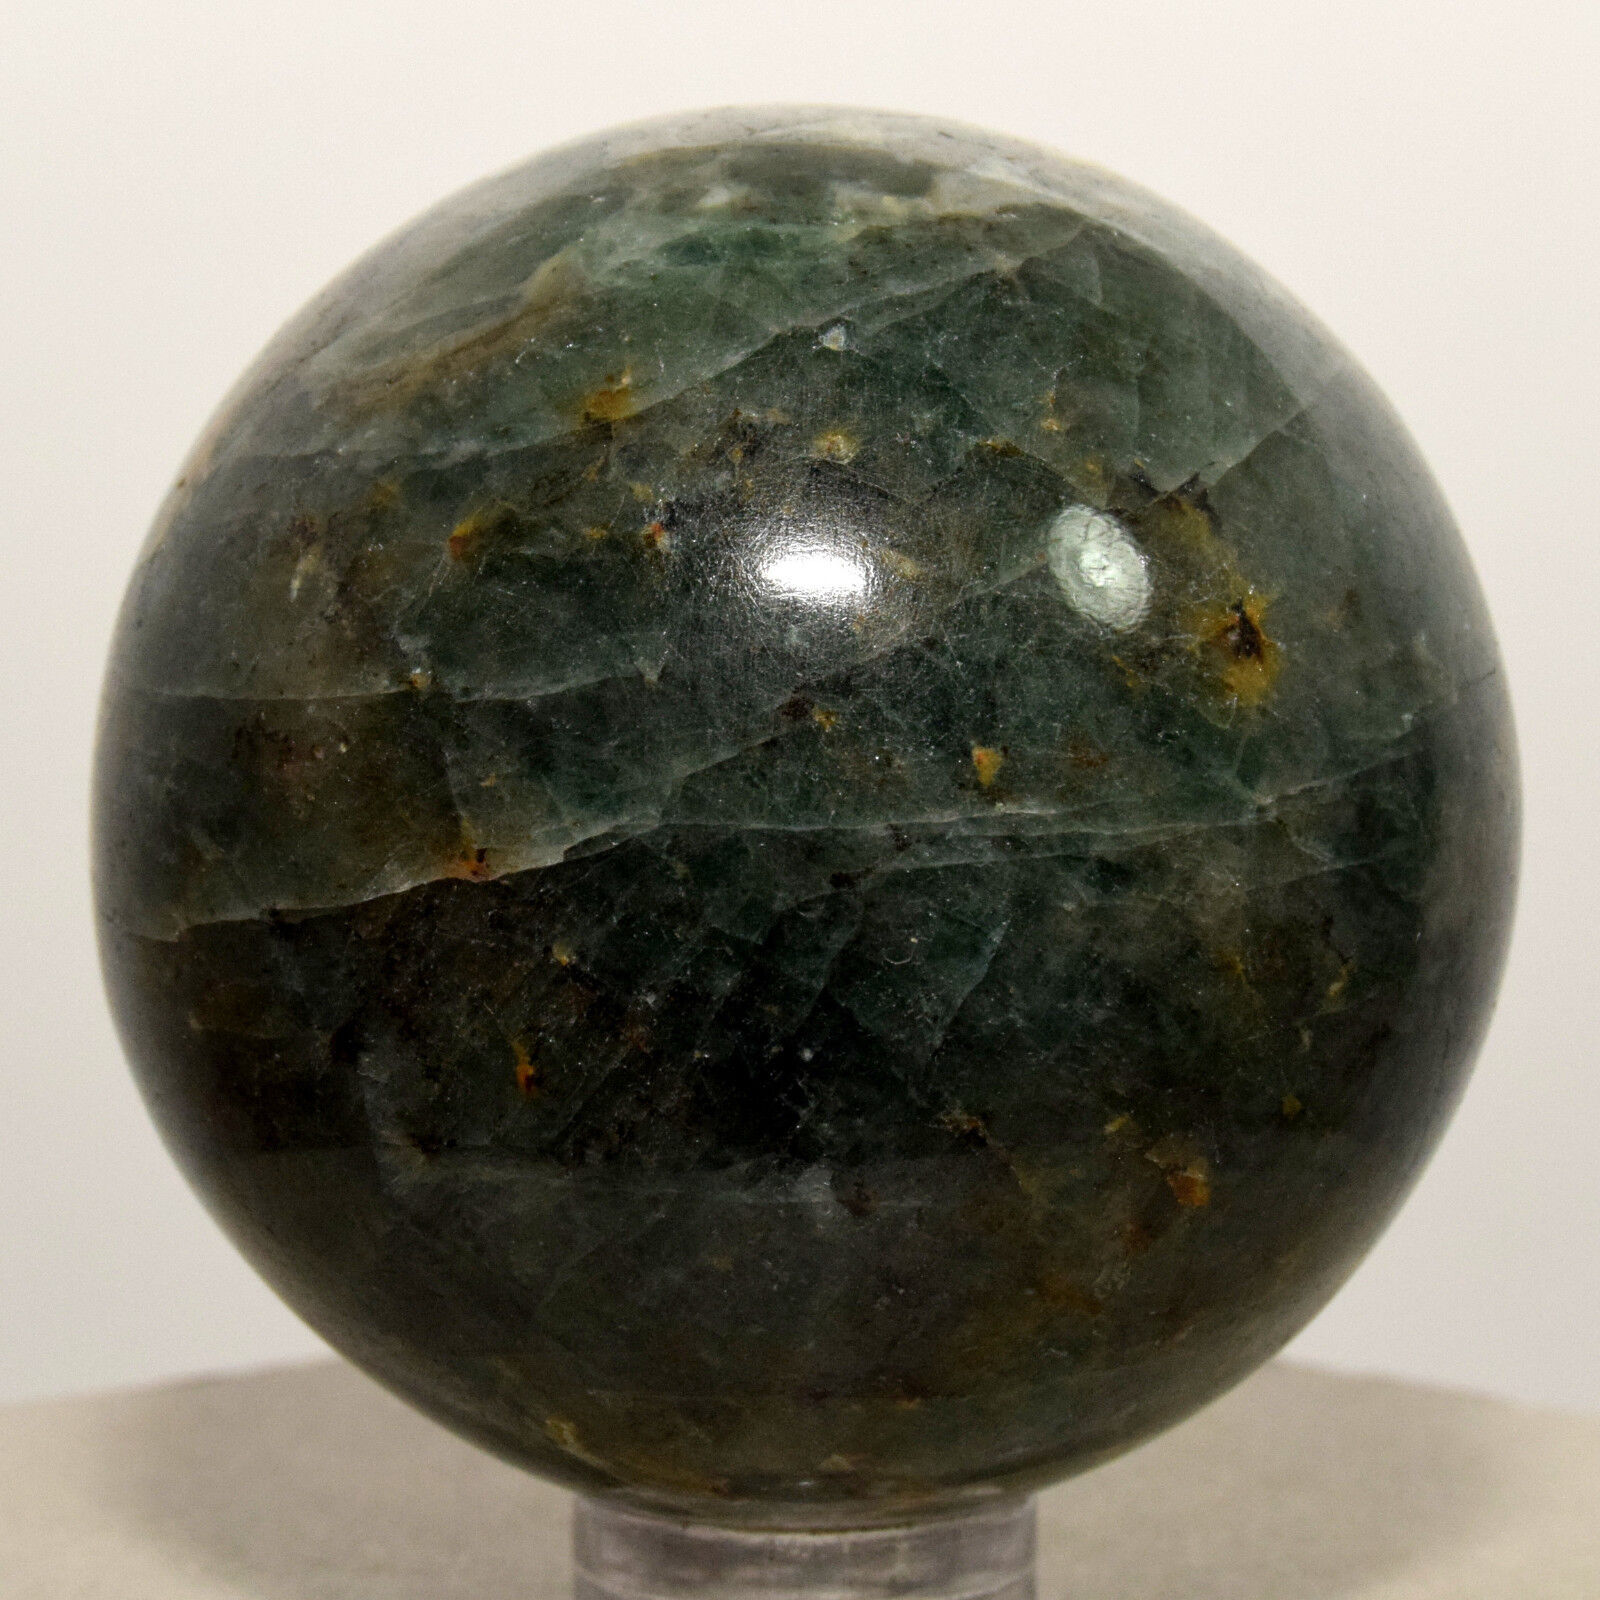 48mm Green DIOPSIDE Sphere Polished Natural Gemstone Crystal Mineral Ball RUSSIA